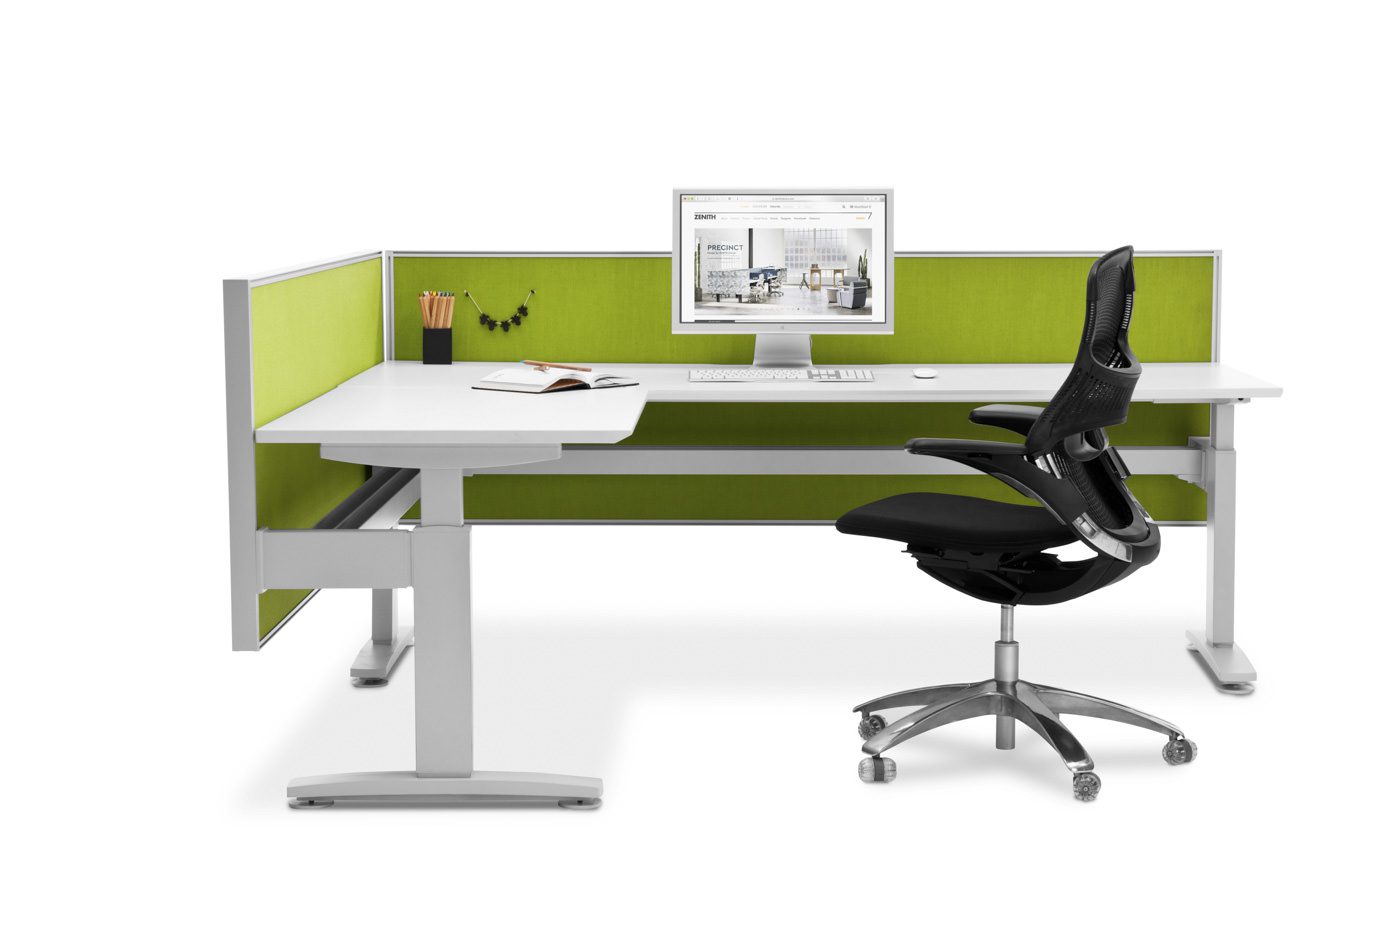 Product photography of desk and chair